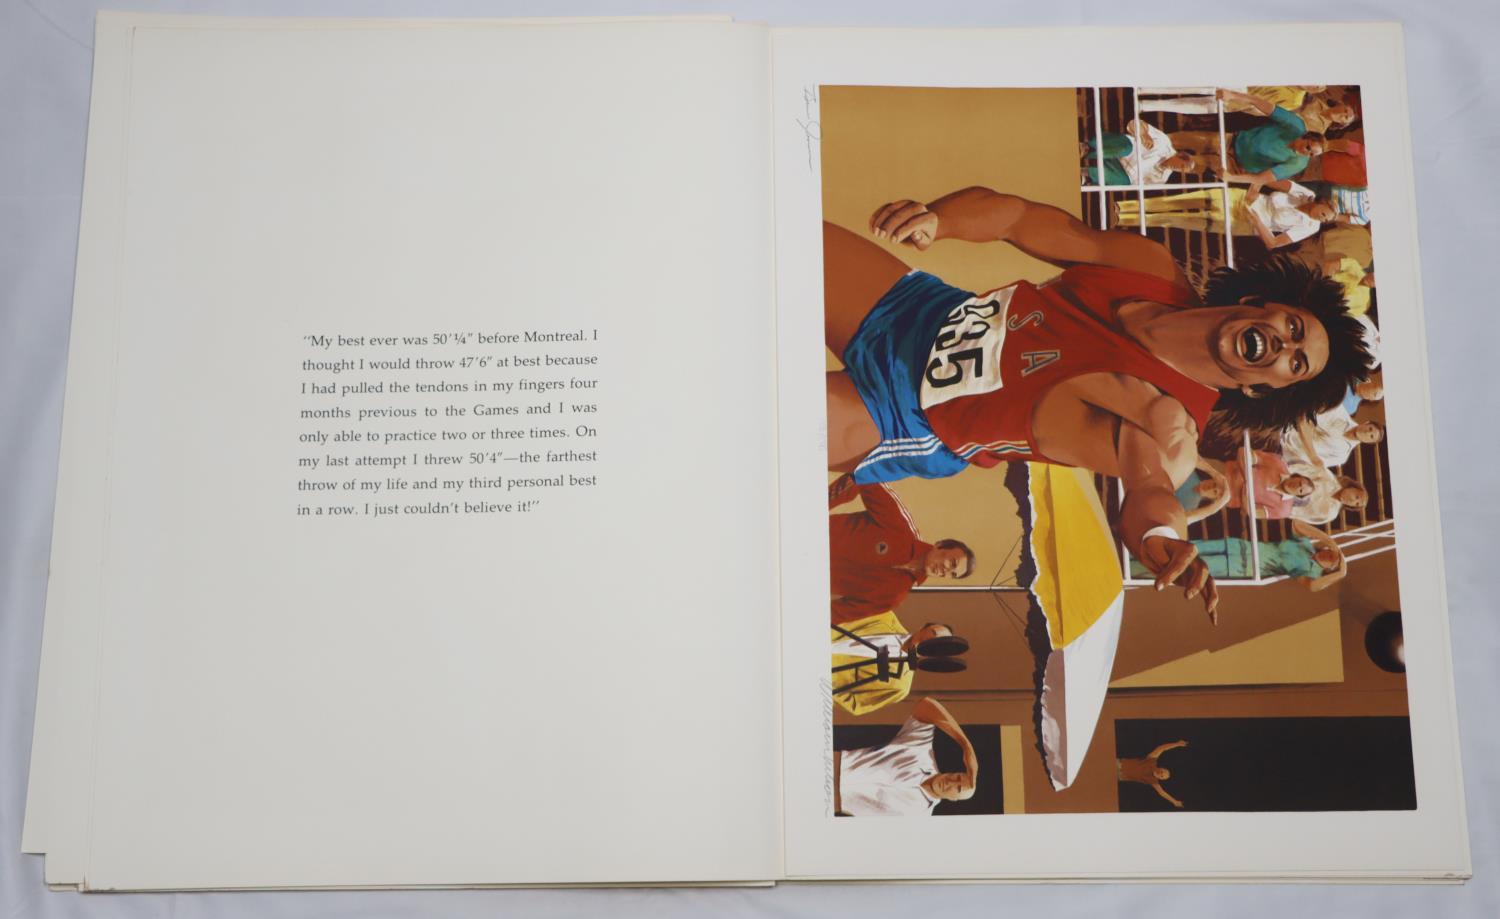 BRUCE JENNER DECATHLON SUITE BY WILLIAM NELSON